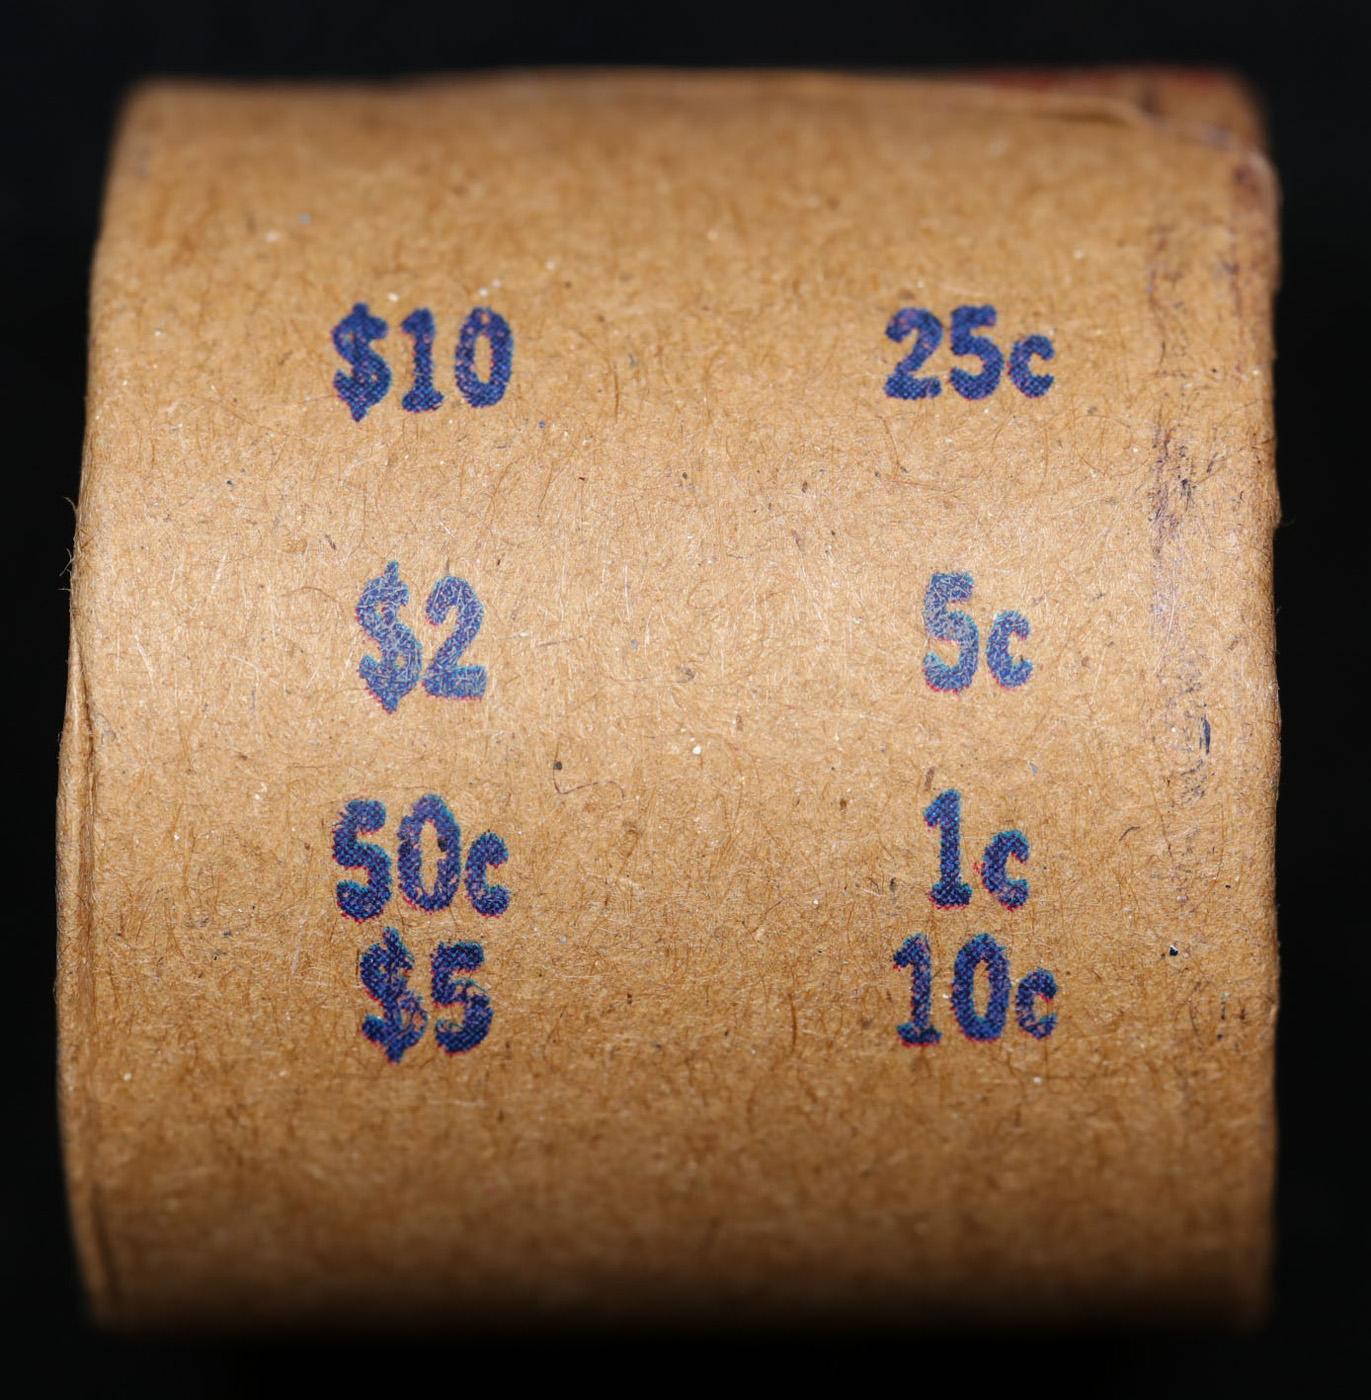 High Value - Mixed Covered End Roll - Marked "Morgan/Peace Reserve" - Weight shows x10 Coins (FC)